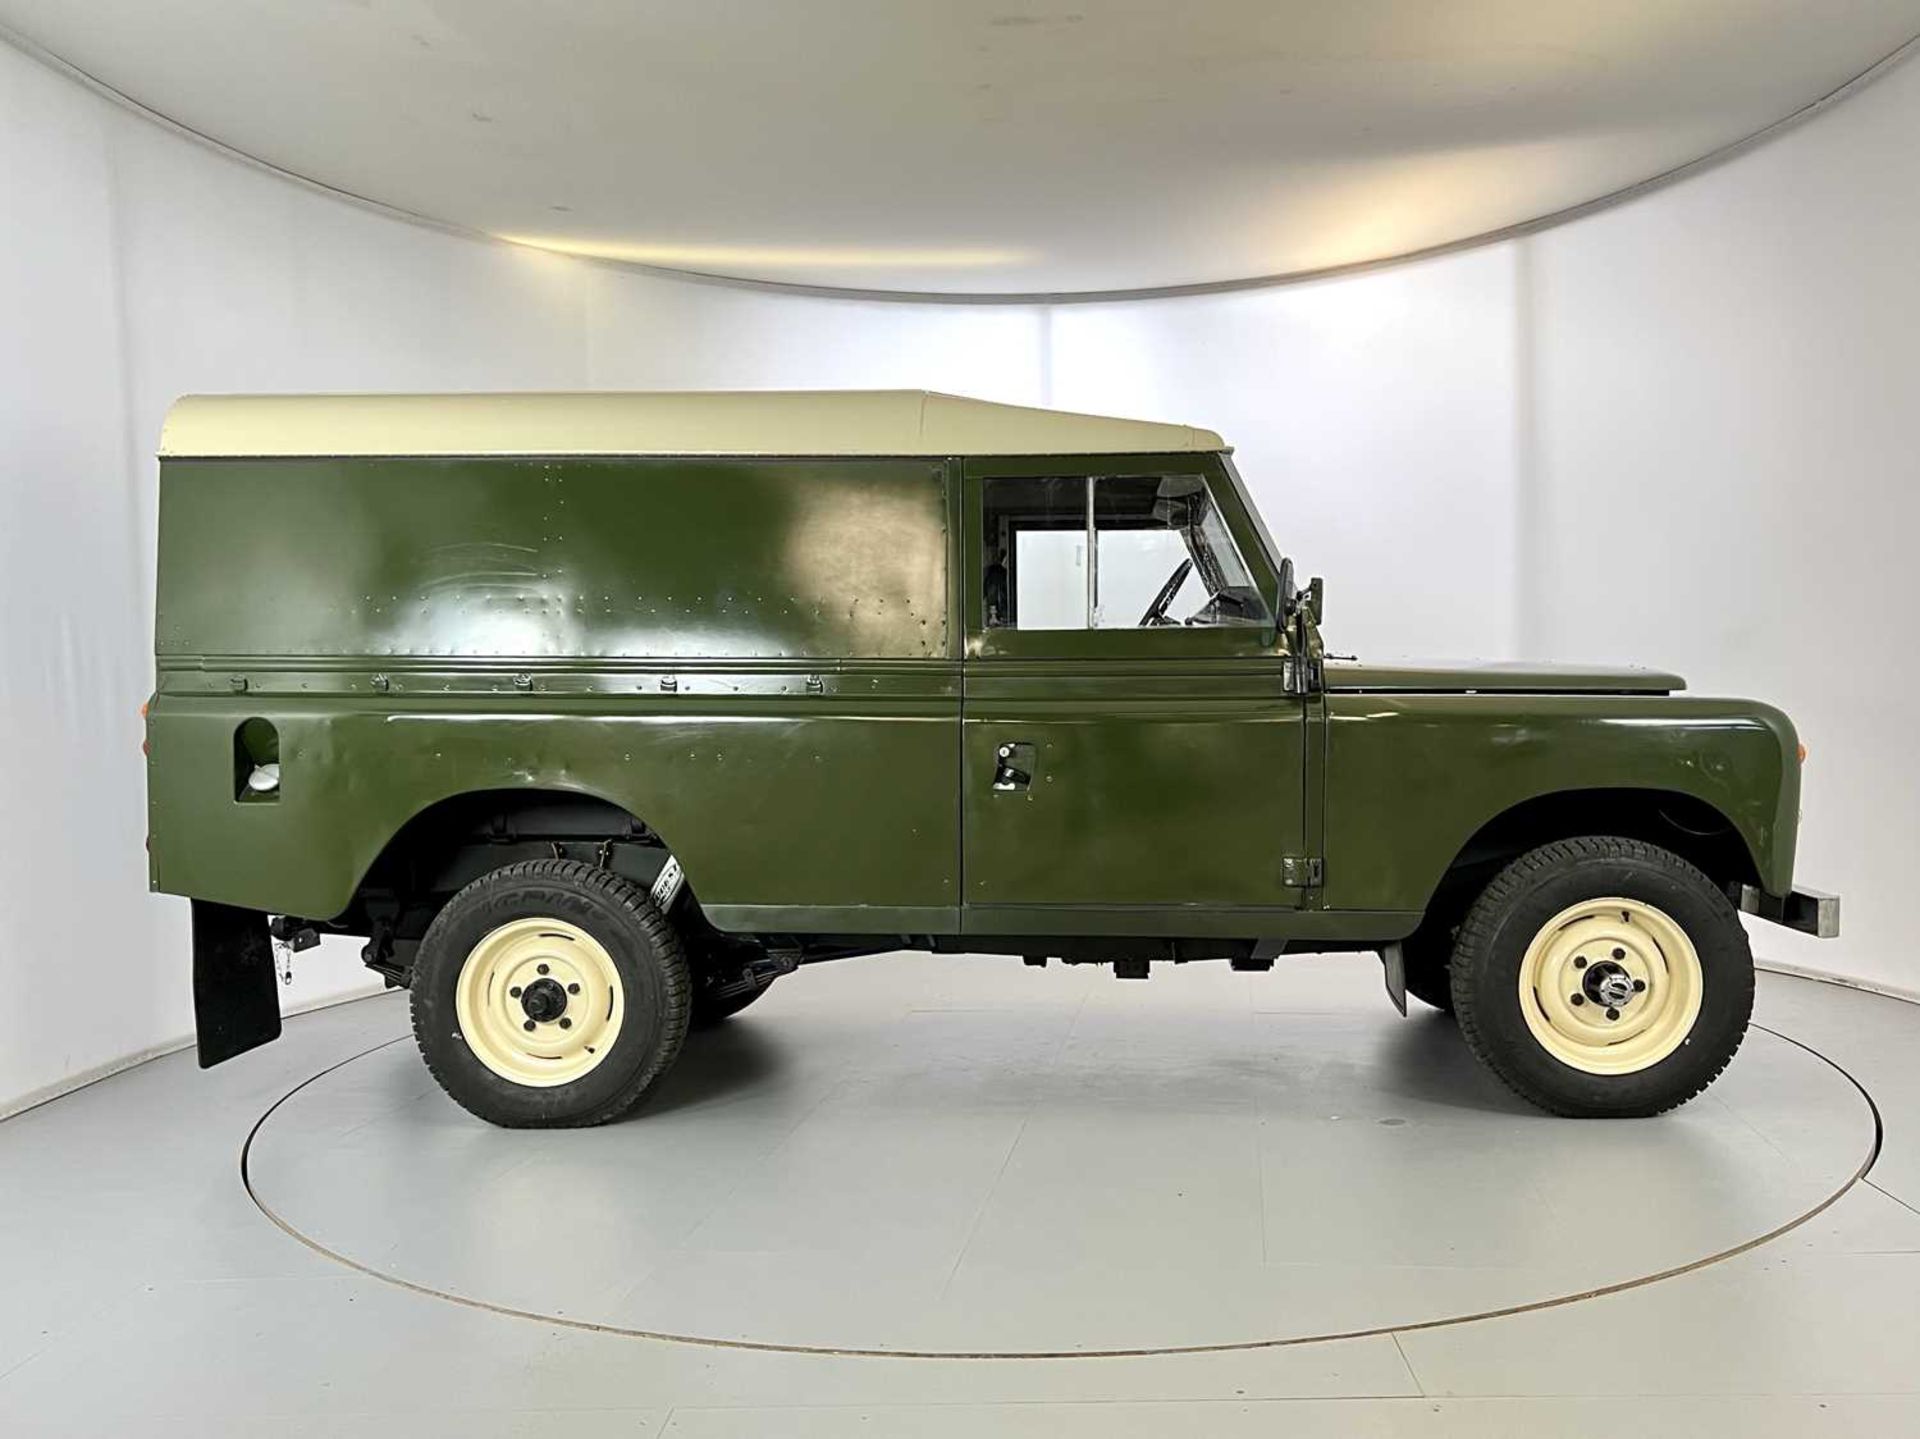 1981 Land Rover Series 3 - 6 Cylinder - Image 11 of 31